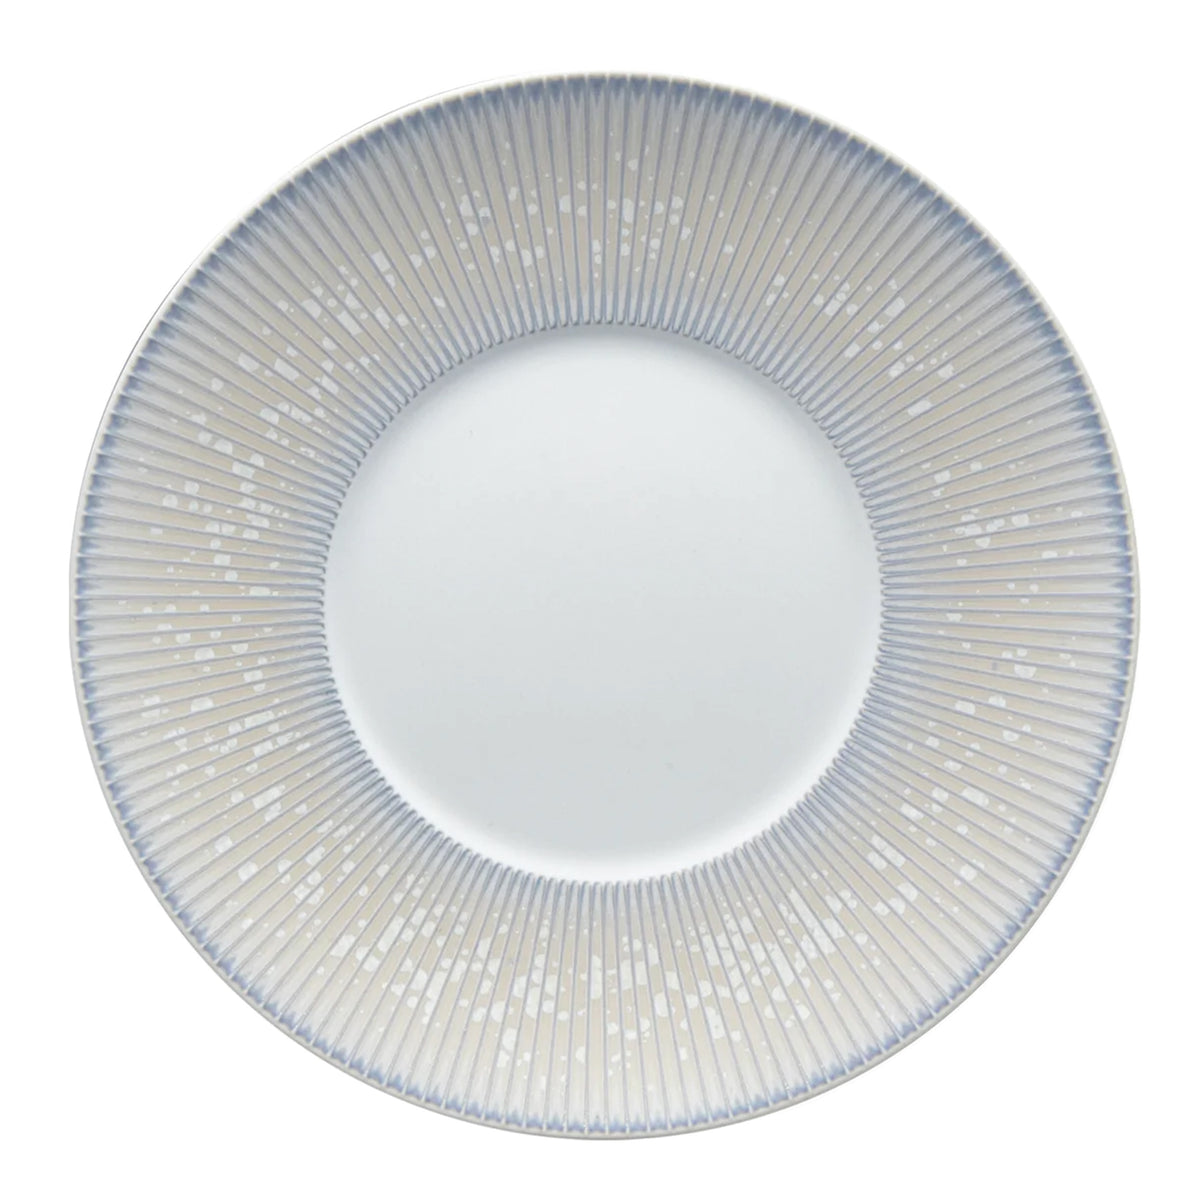 SONG Perle - Charger plate, Bolero